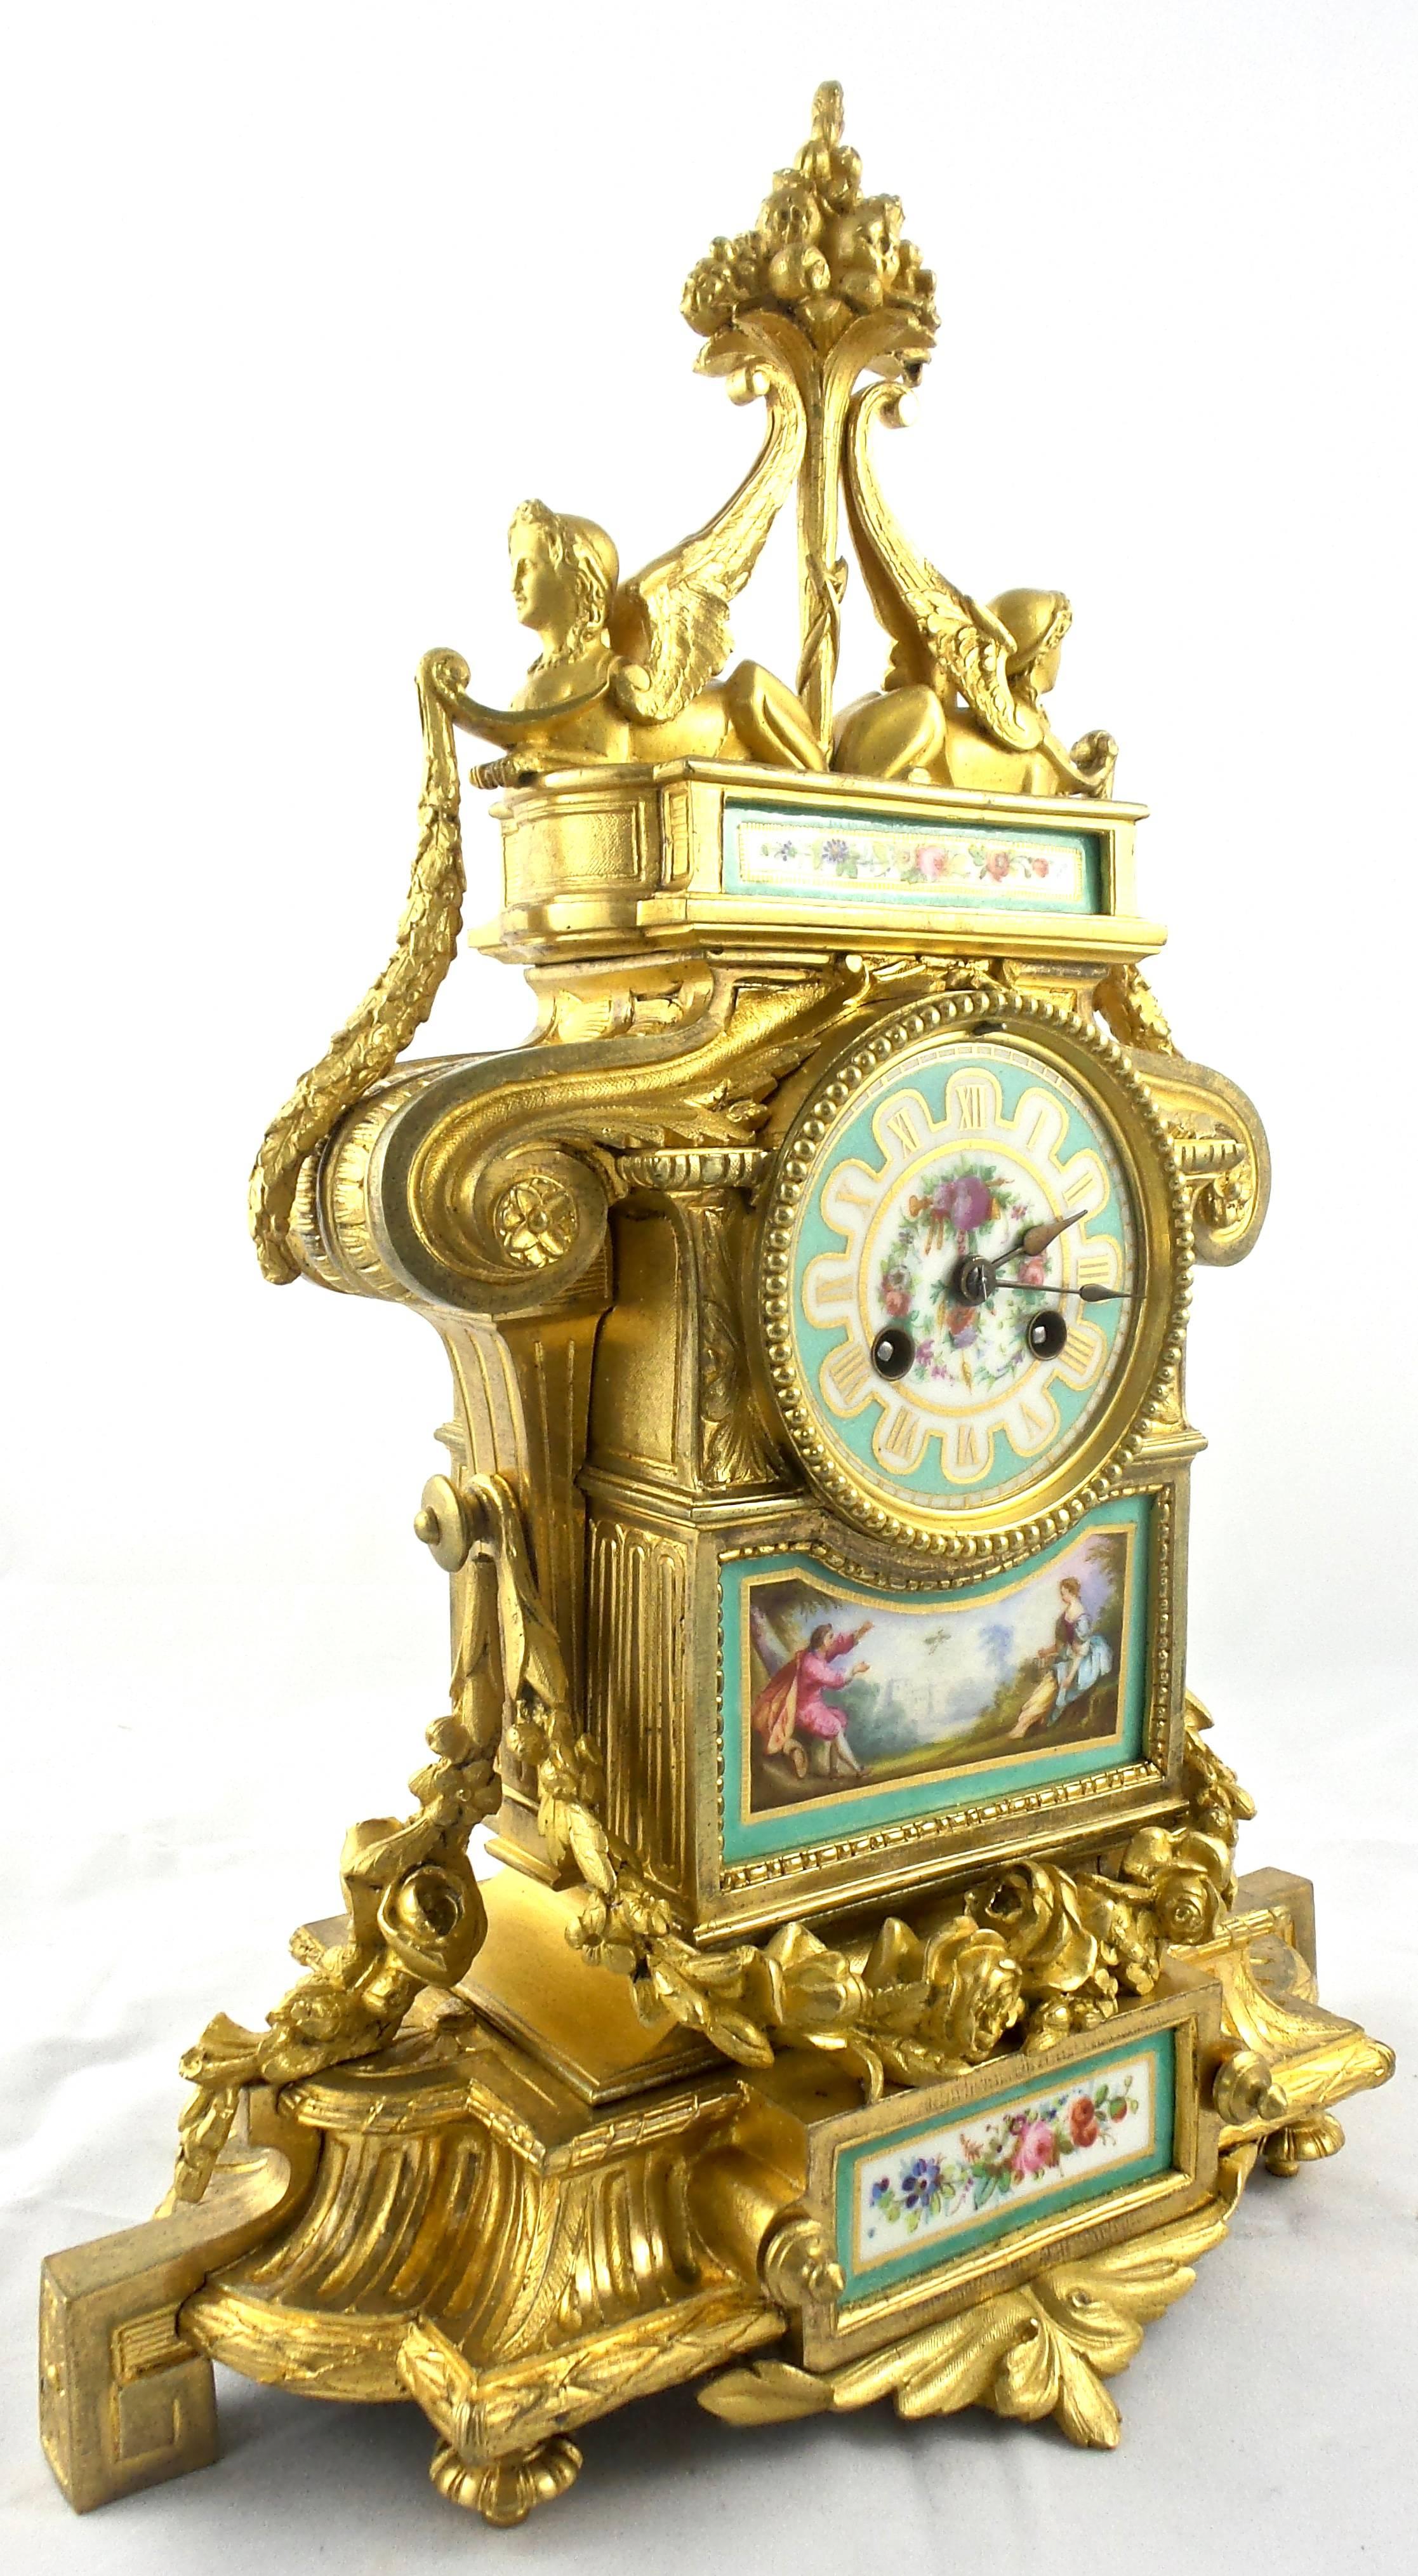 An original authentic antique 19th century French gilt ormolu bronze and Sevres porcelain Mantel clock of excellent proportion signed G.V on the movement
Museum and palace Quality clock with fine details
Having patterns and designs and draped